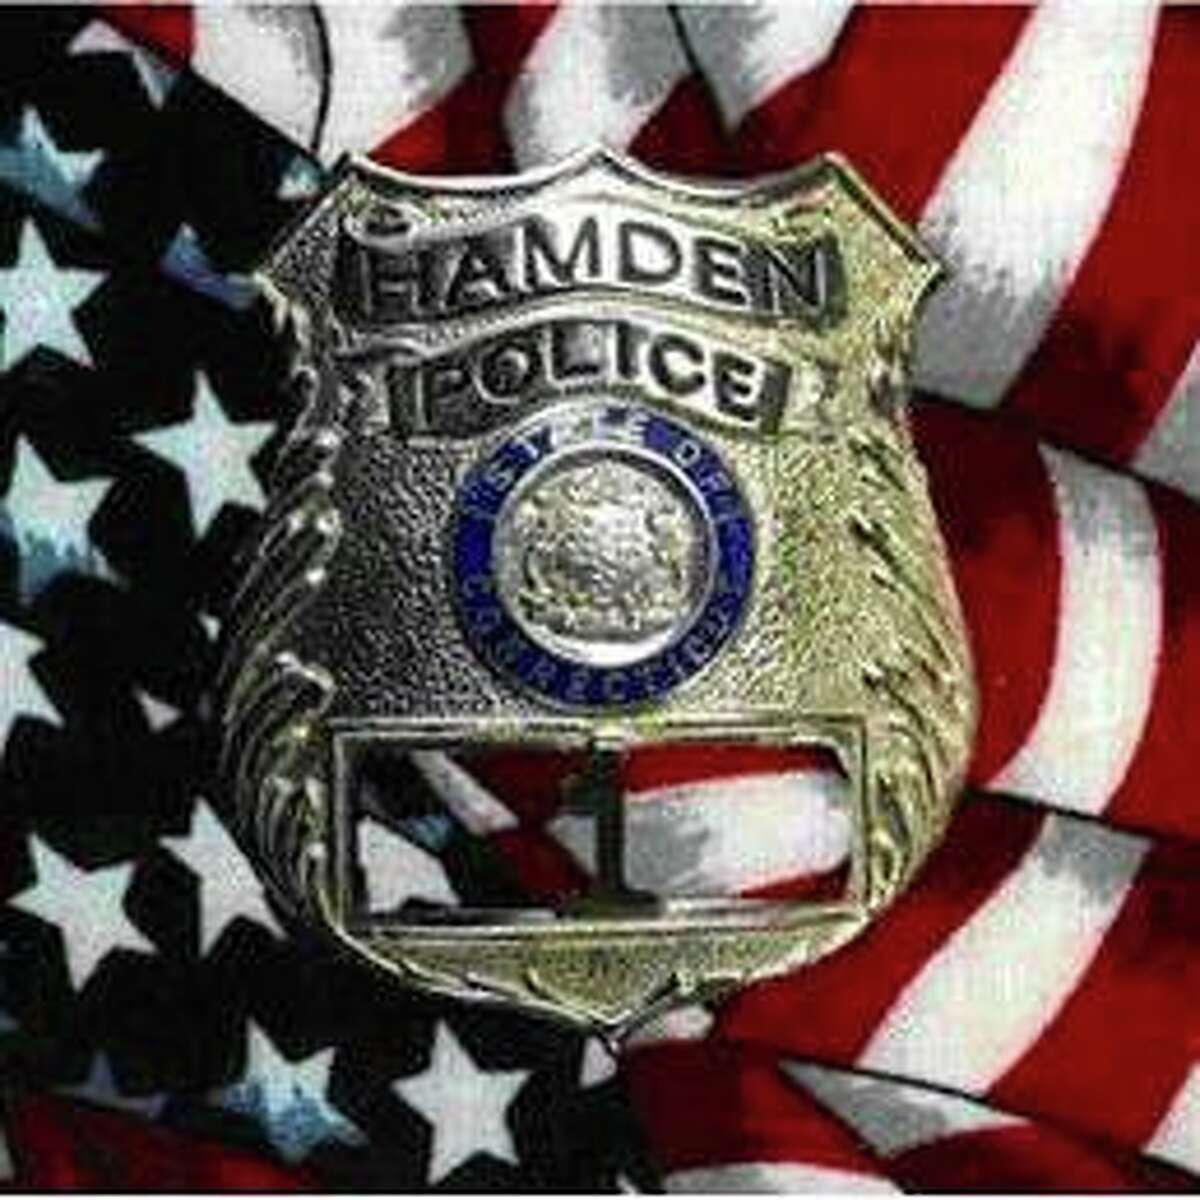 Hamden police are looking for the driver of a vehicle that struck seven vehicles and was last seen running from the scene with an infant in car seat on late Tuesday afternoon on Nov. 17, 2020. Capt. Ronald Smith said police later located the unharmed eight month-old infant, who was with family members. There were no serious injuries reported.